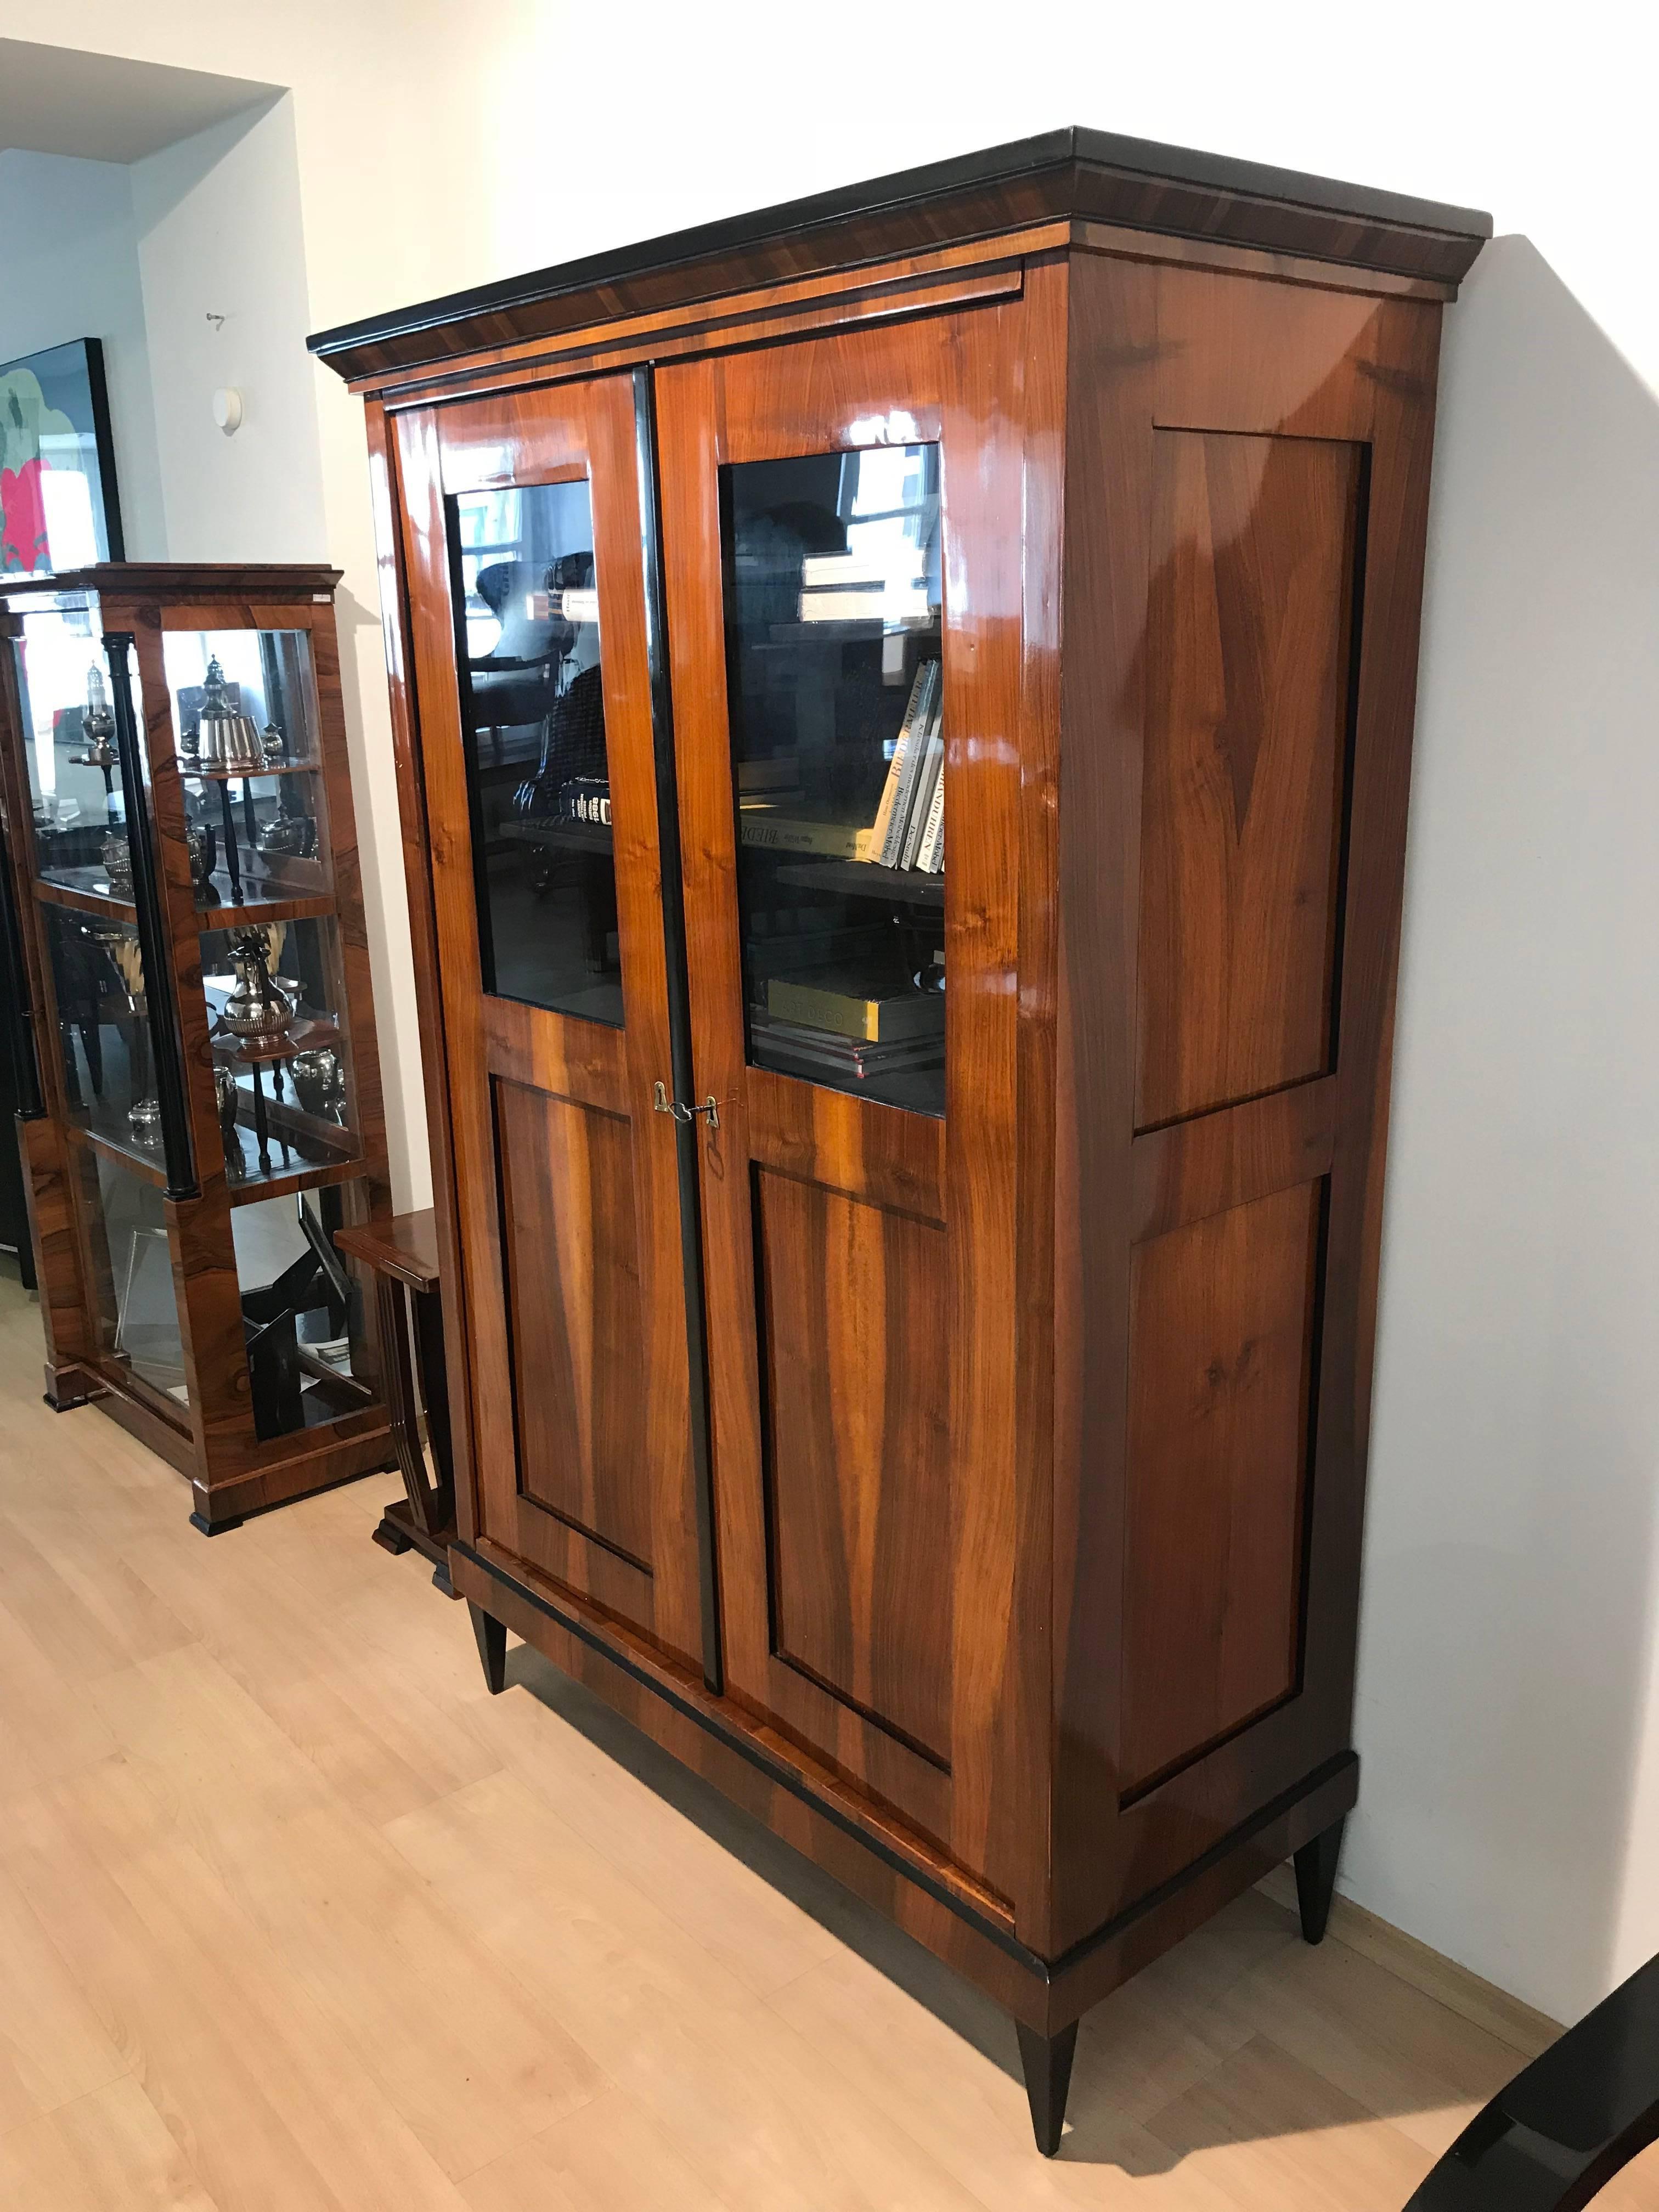 Beautiful classicist Biedermeier Vitrine / Showcase from Germany about 1825.

Wonderful book-matched Walnut Veneer and original brass fittings.

Two doors and with glasses in the upper half of the front door. 
On the inside it has 5 adjustable